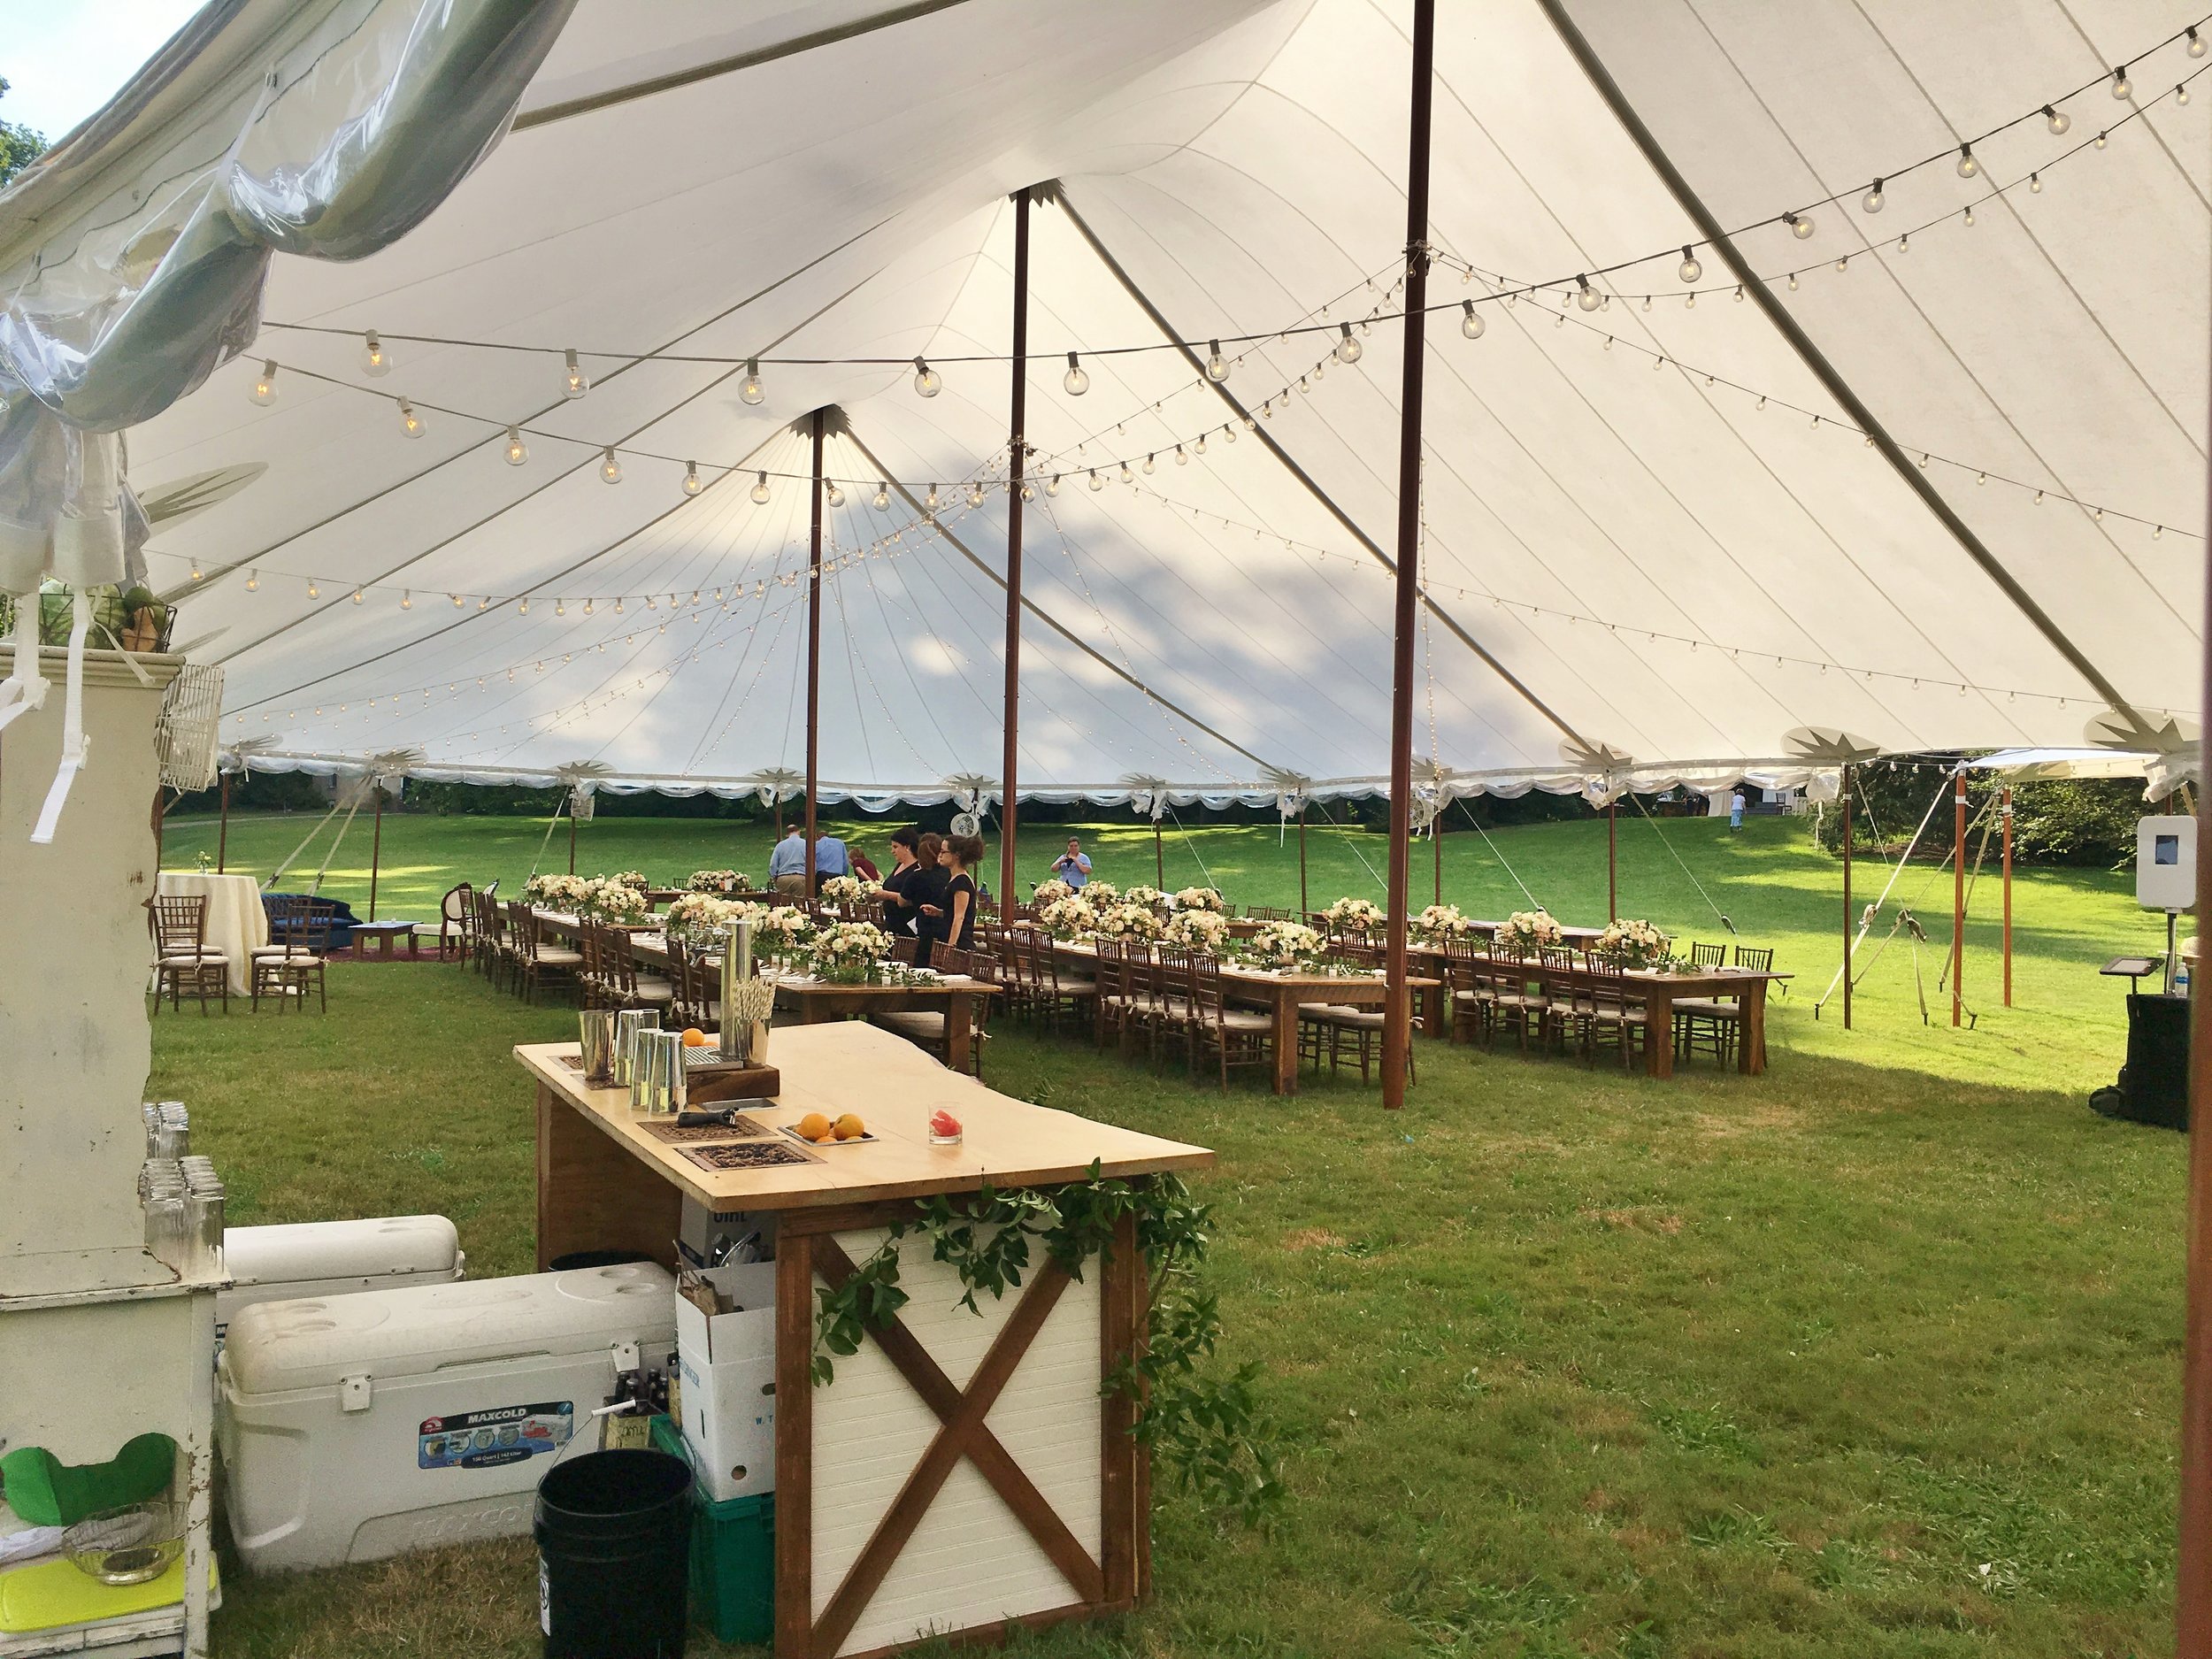 Sailcloth wedding tent with cafe lights and faux wooden poles